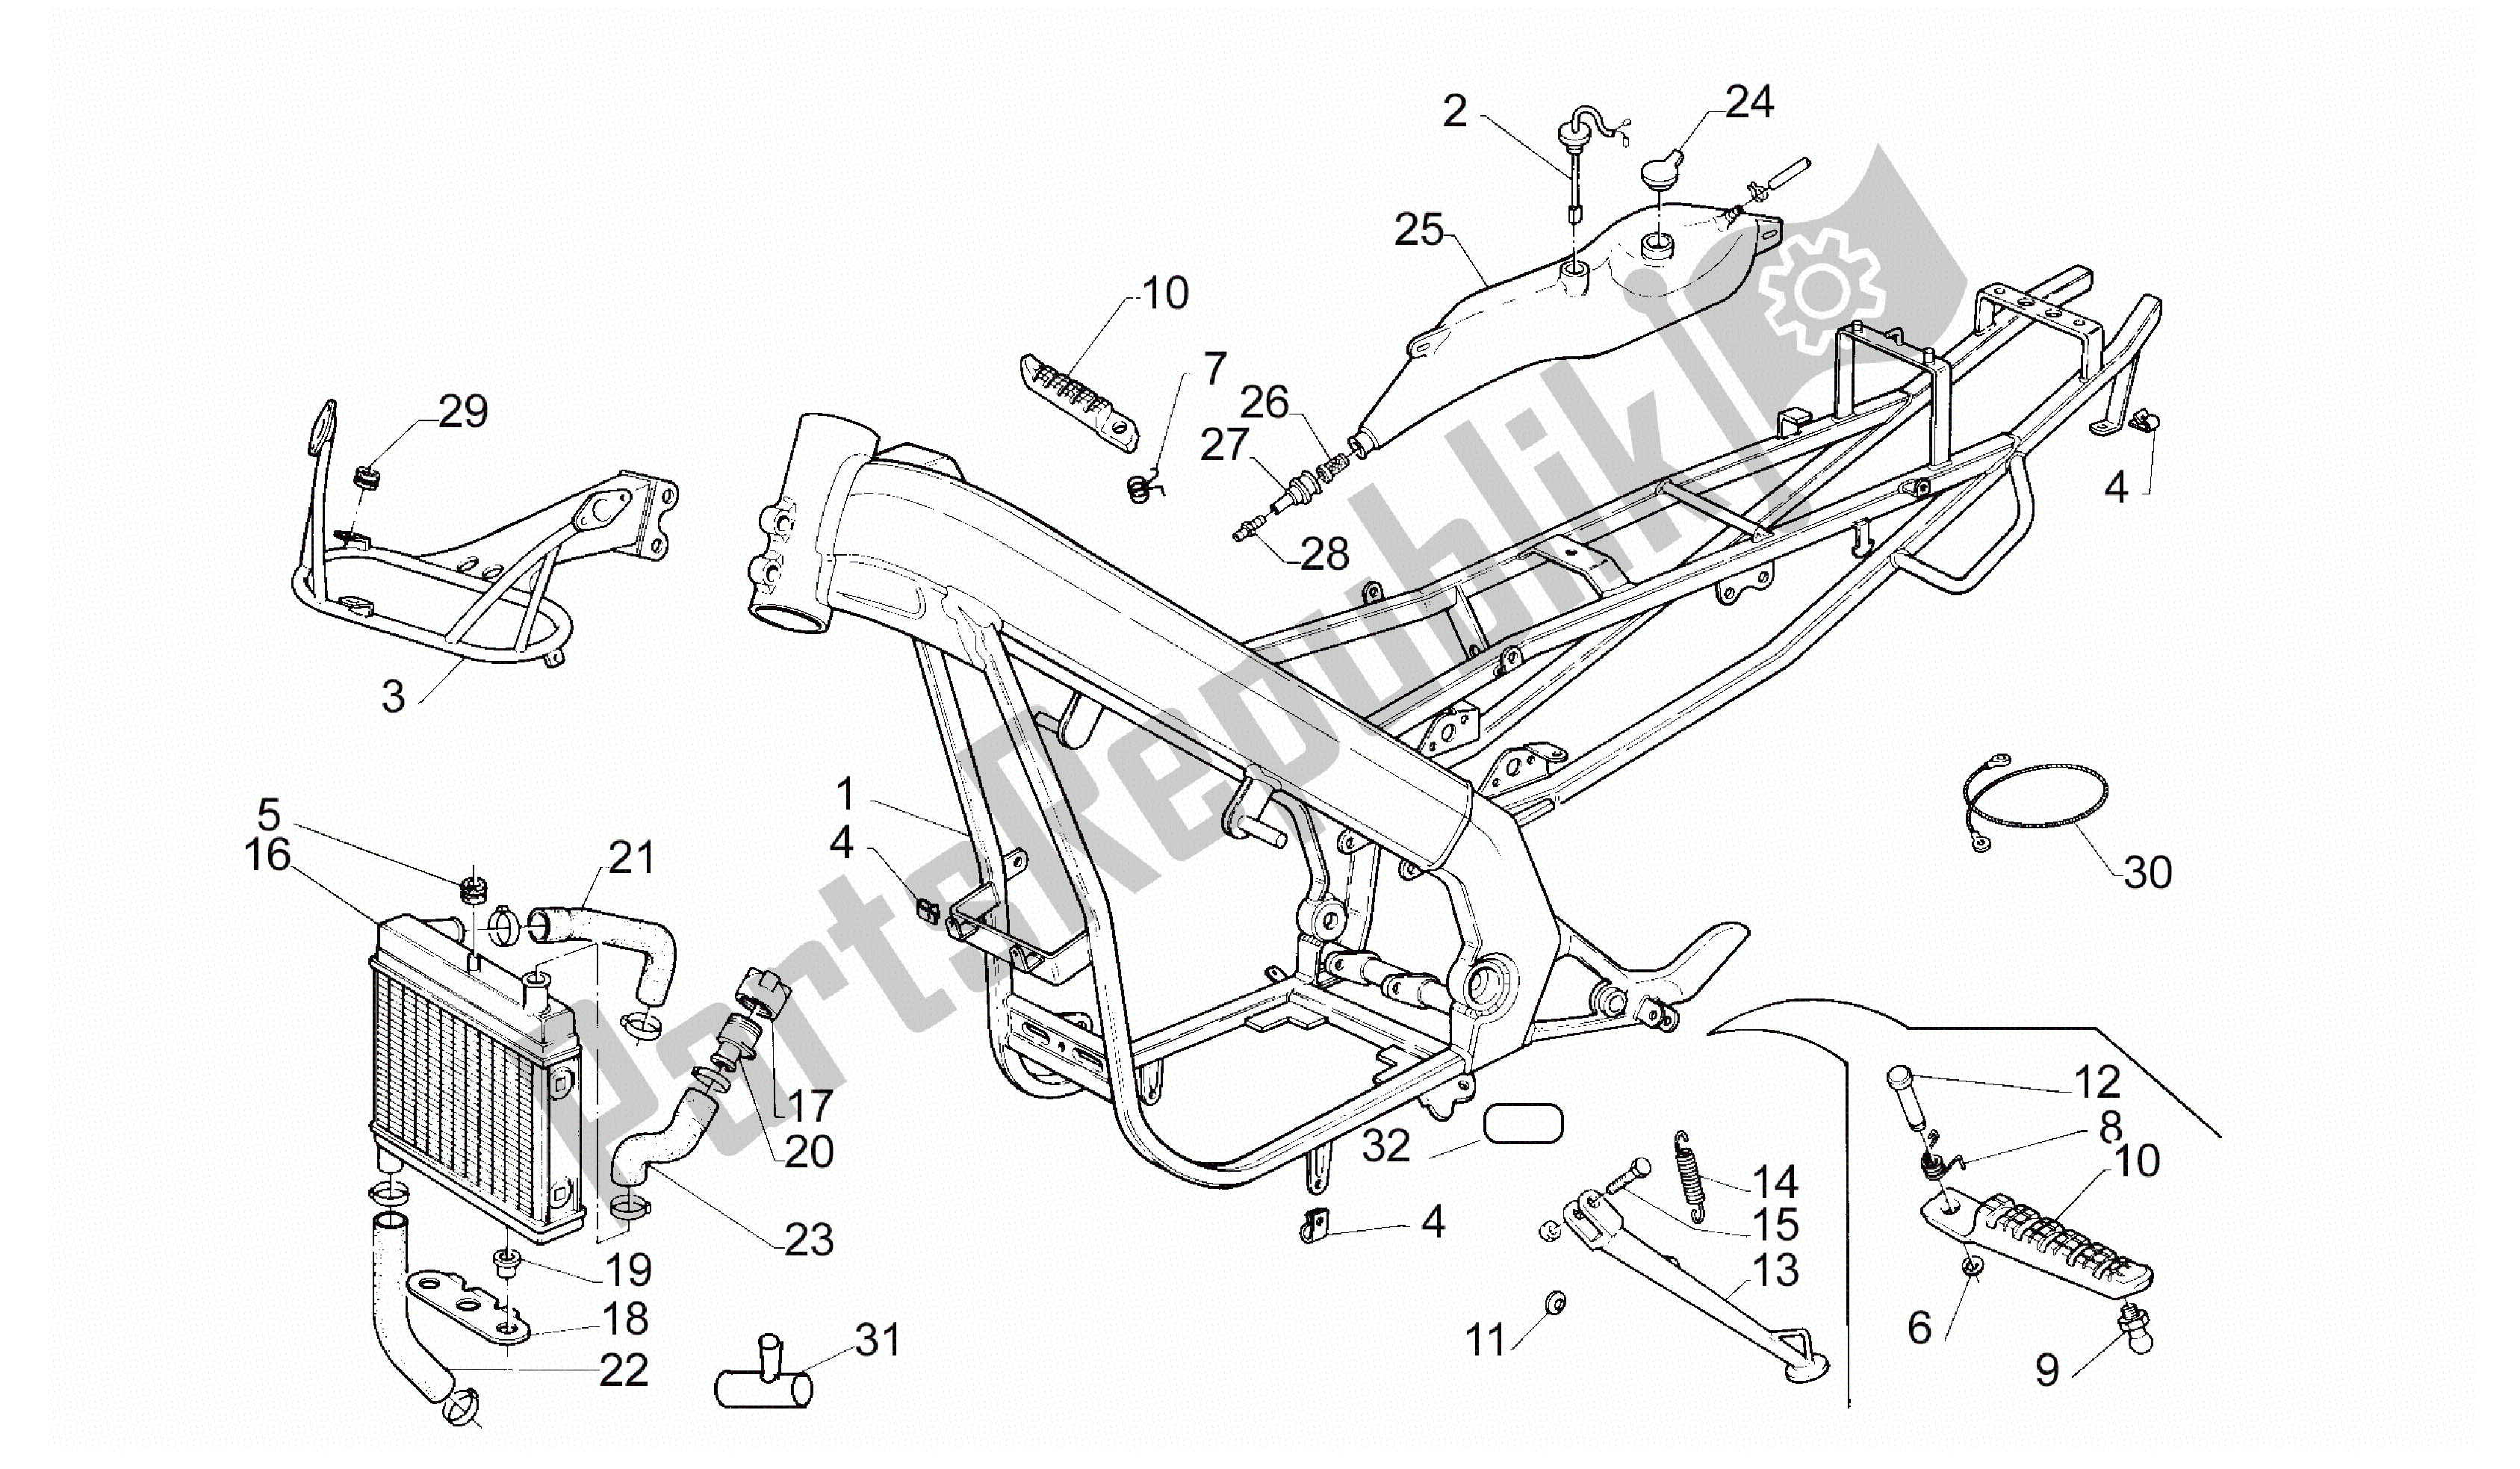 All parts for the Frame of the Aprilia RS 50 1993 - 1995